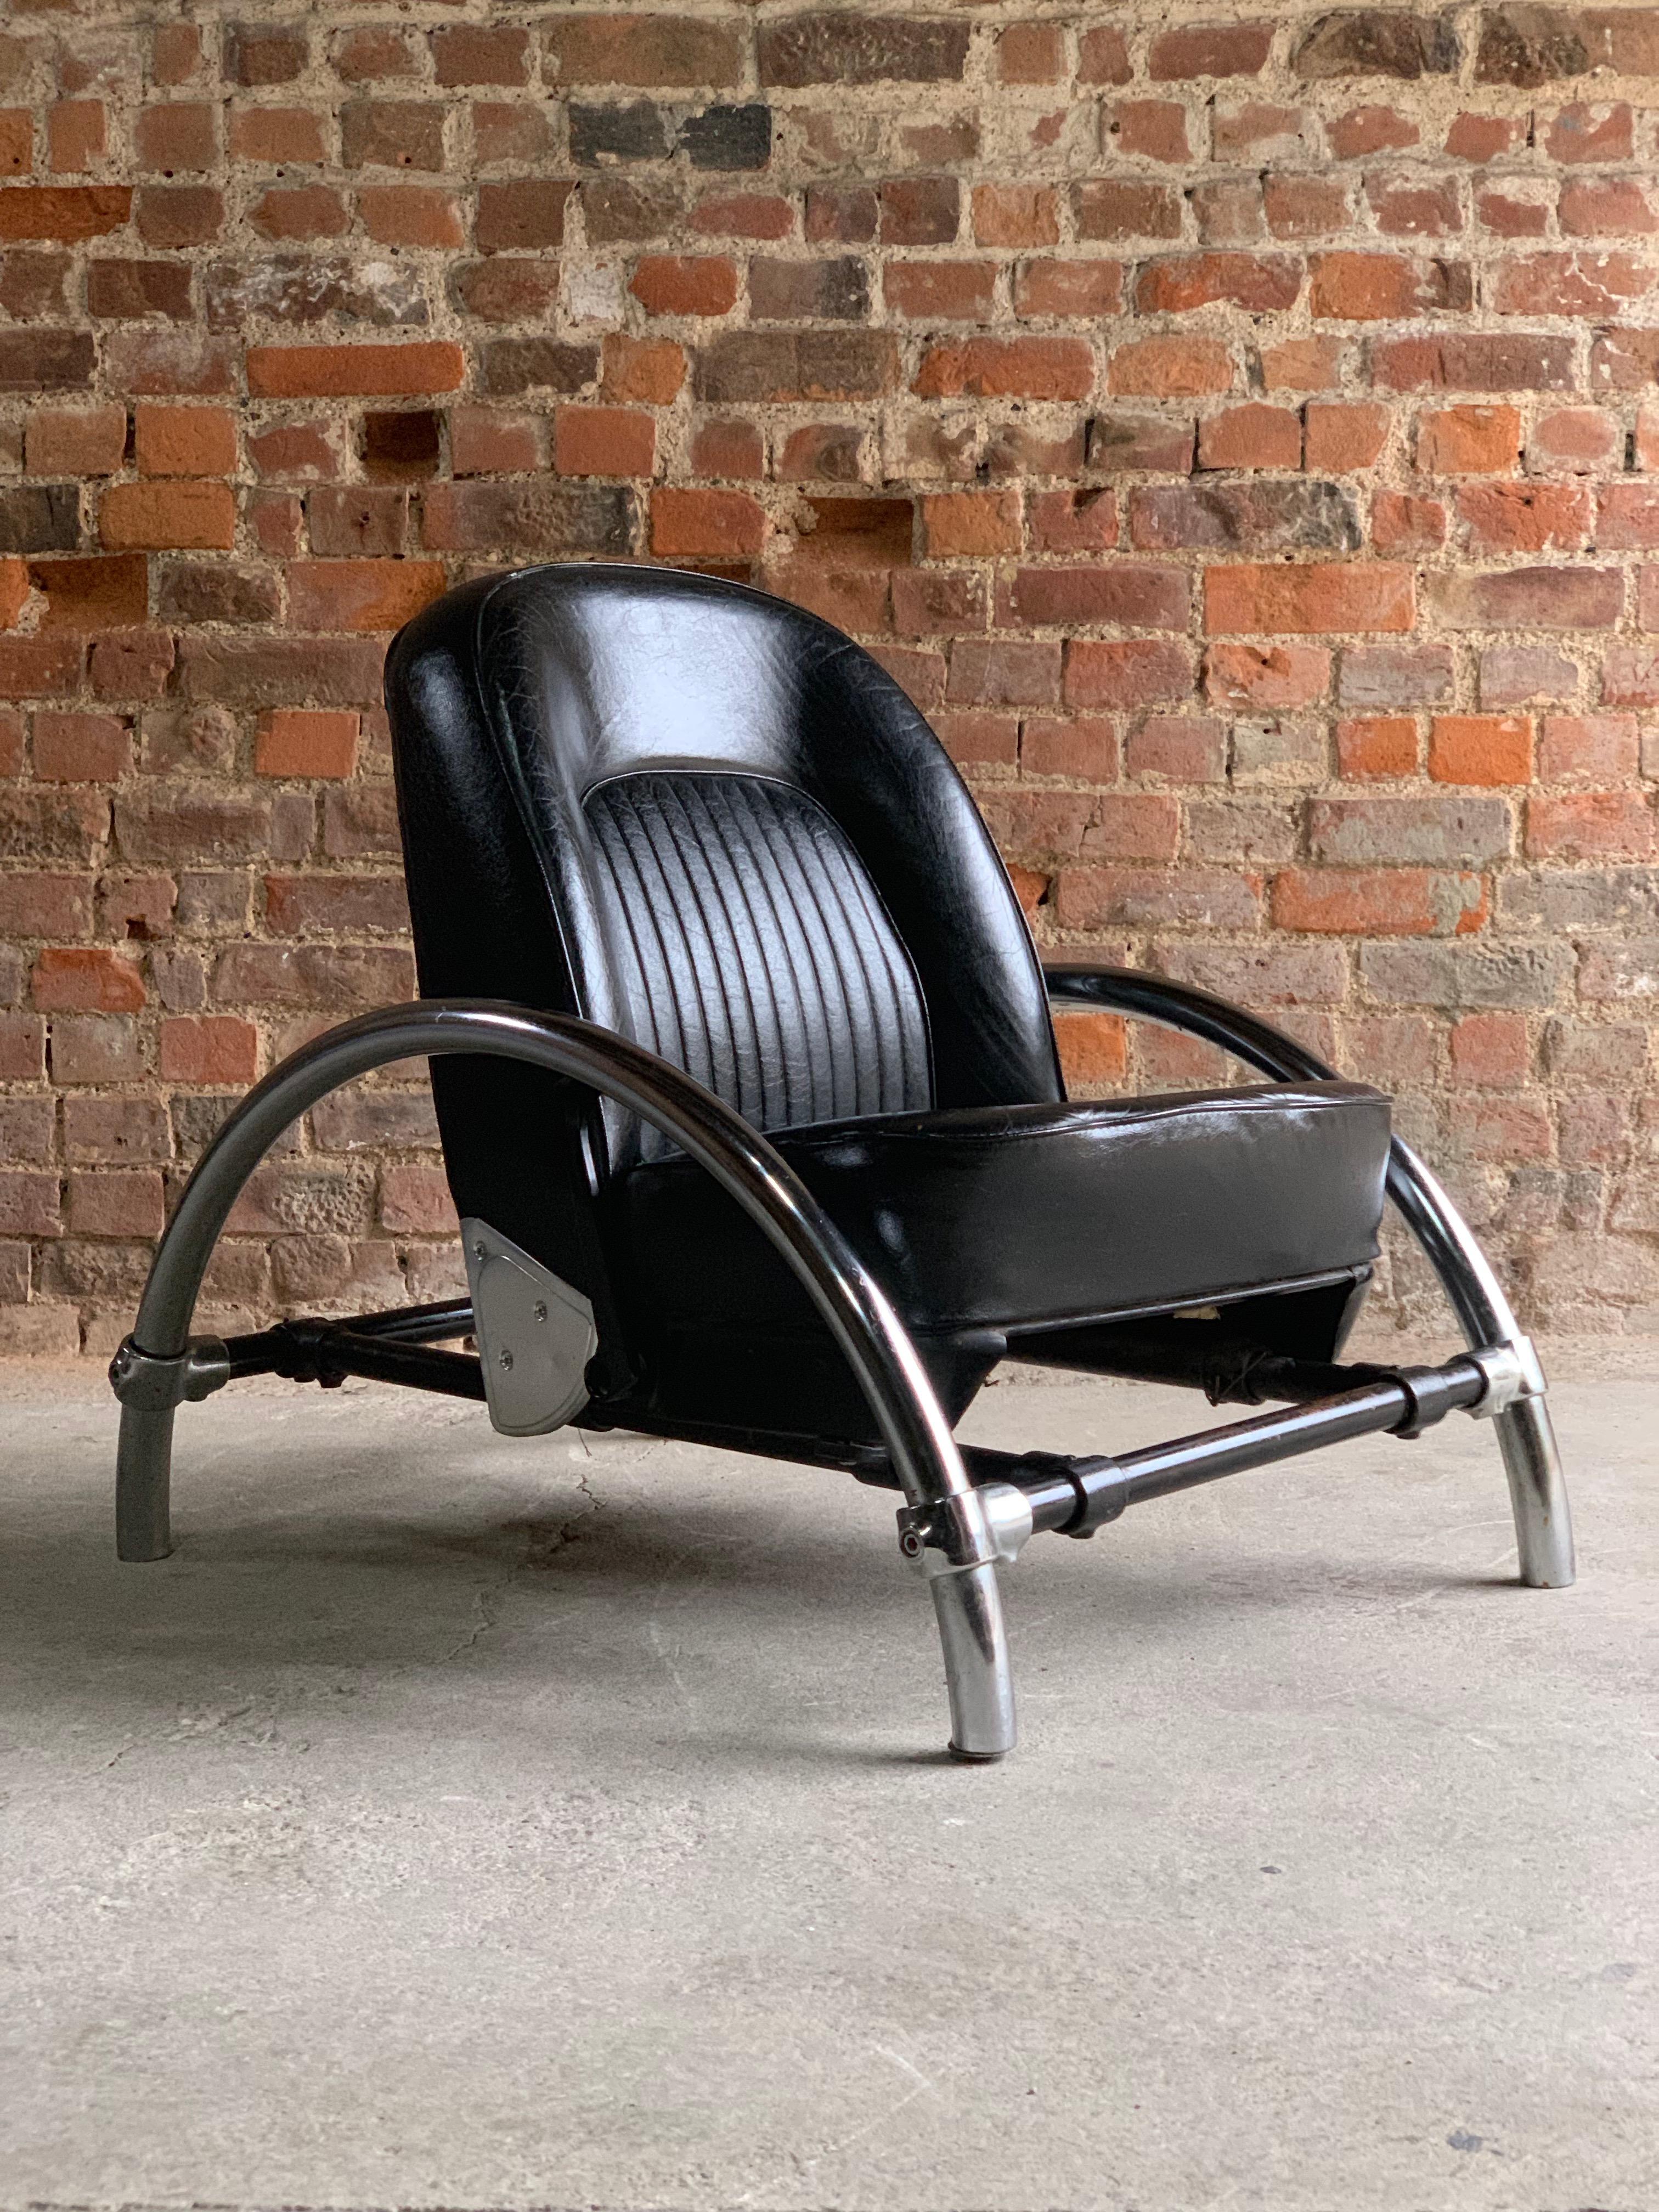 Ron Arad Rover Chair 1981, Black leather Rover chair with reclining action.

Ron Arad said he 